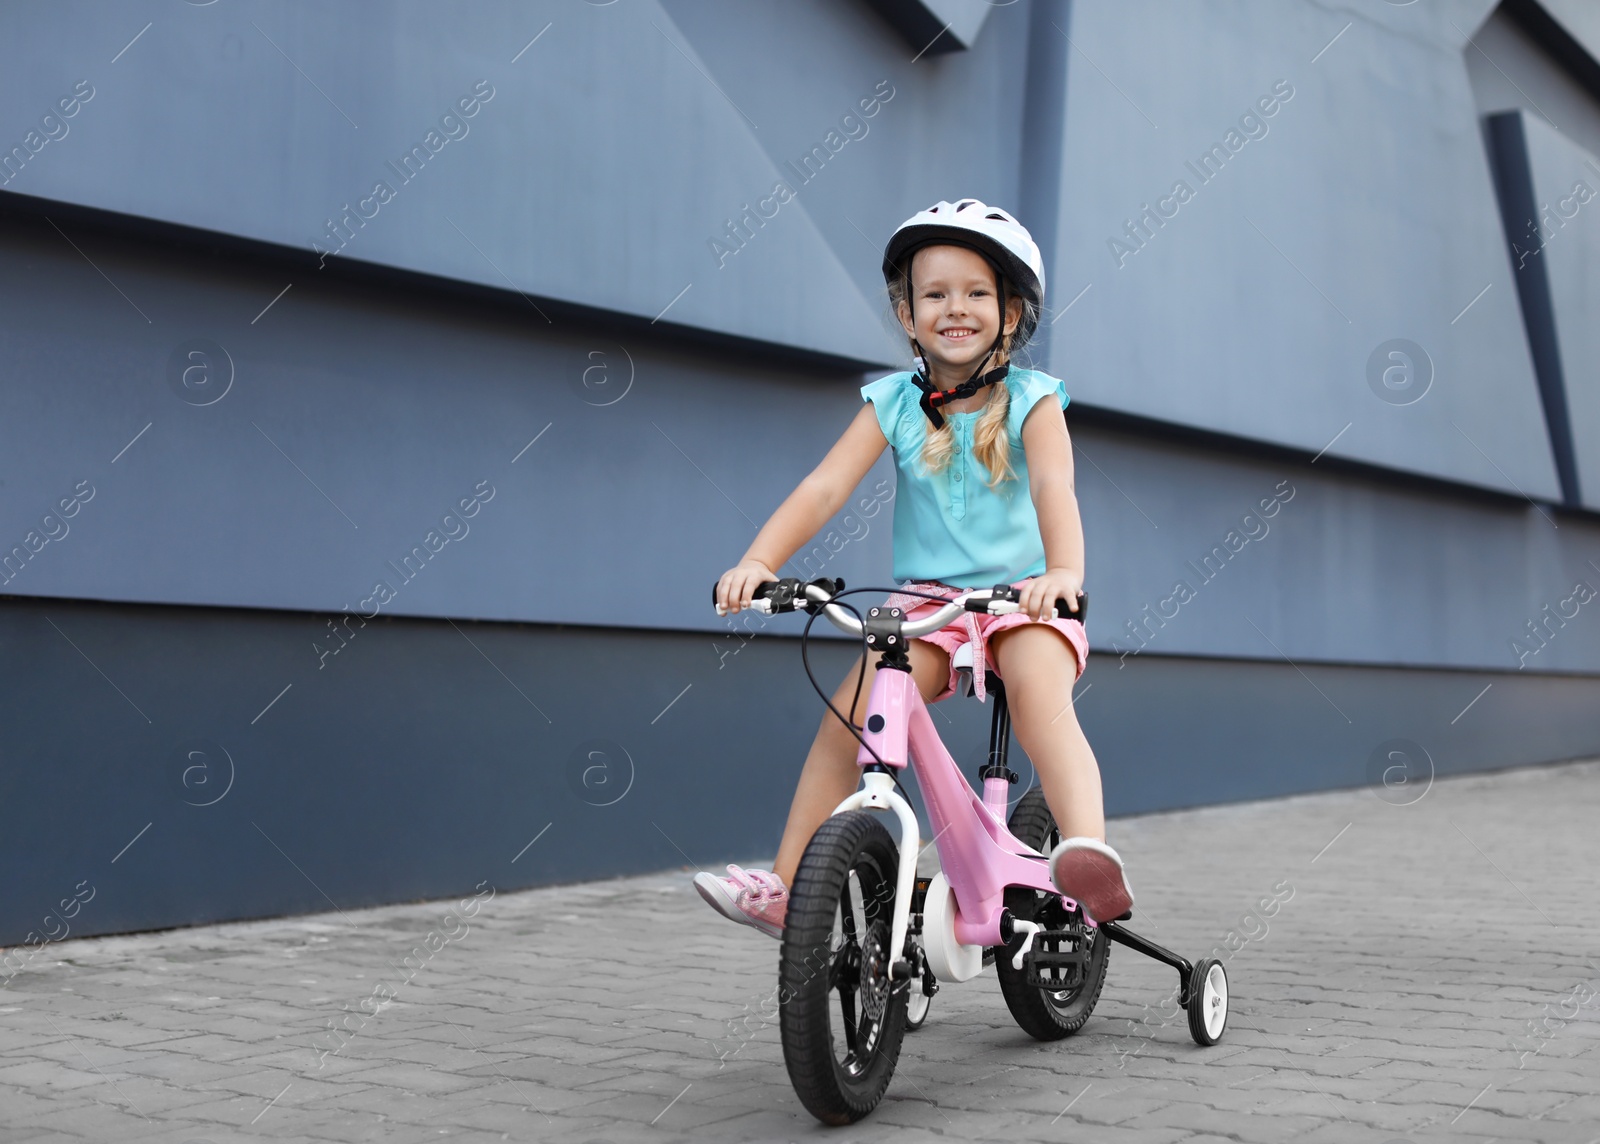 Photo of Little girl riding bicycle on street near gray wall